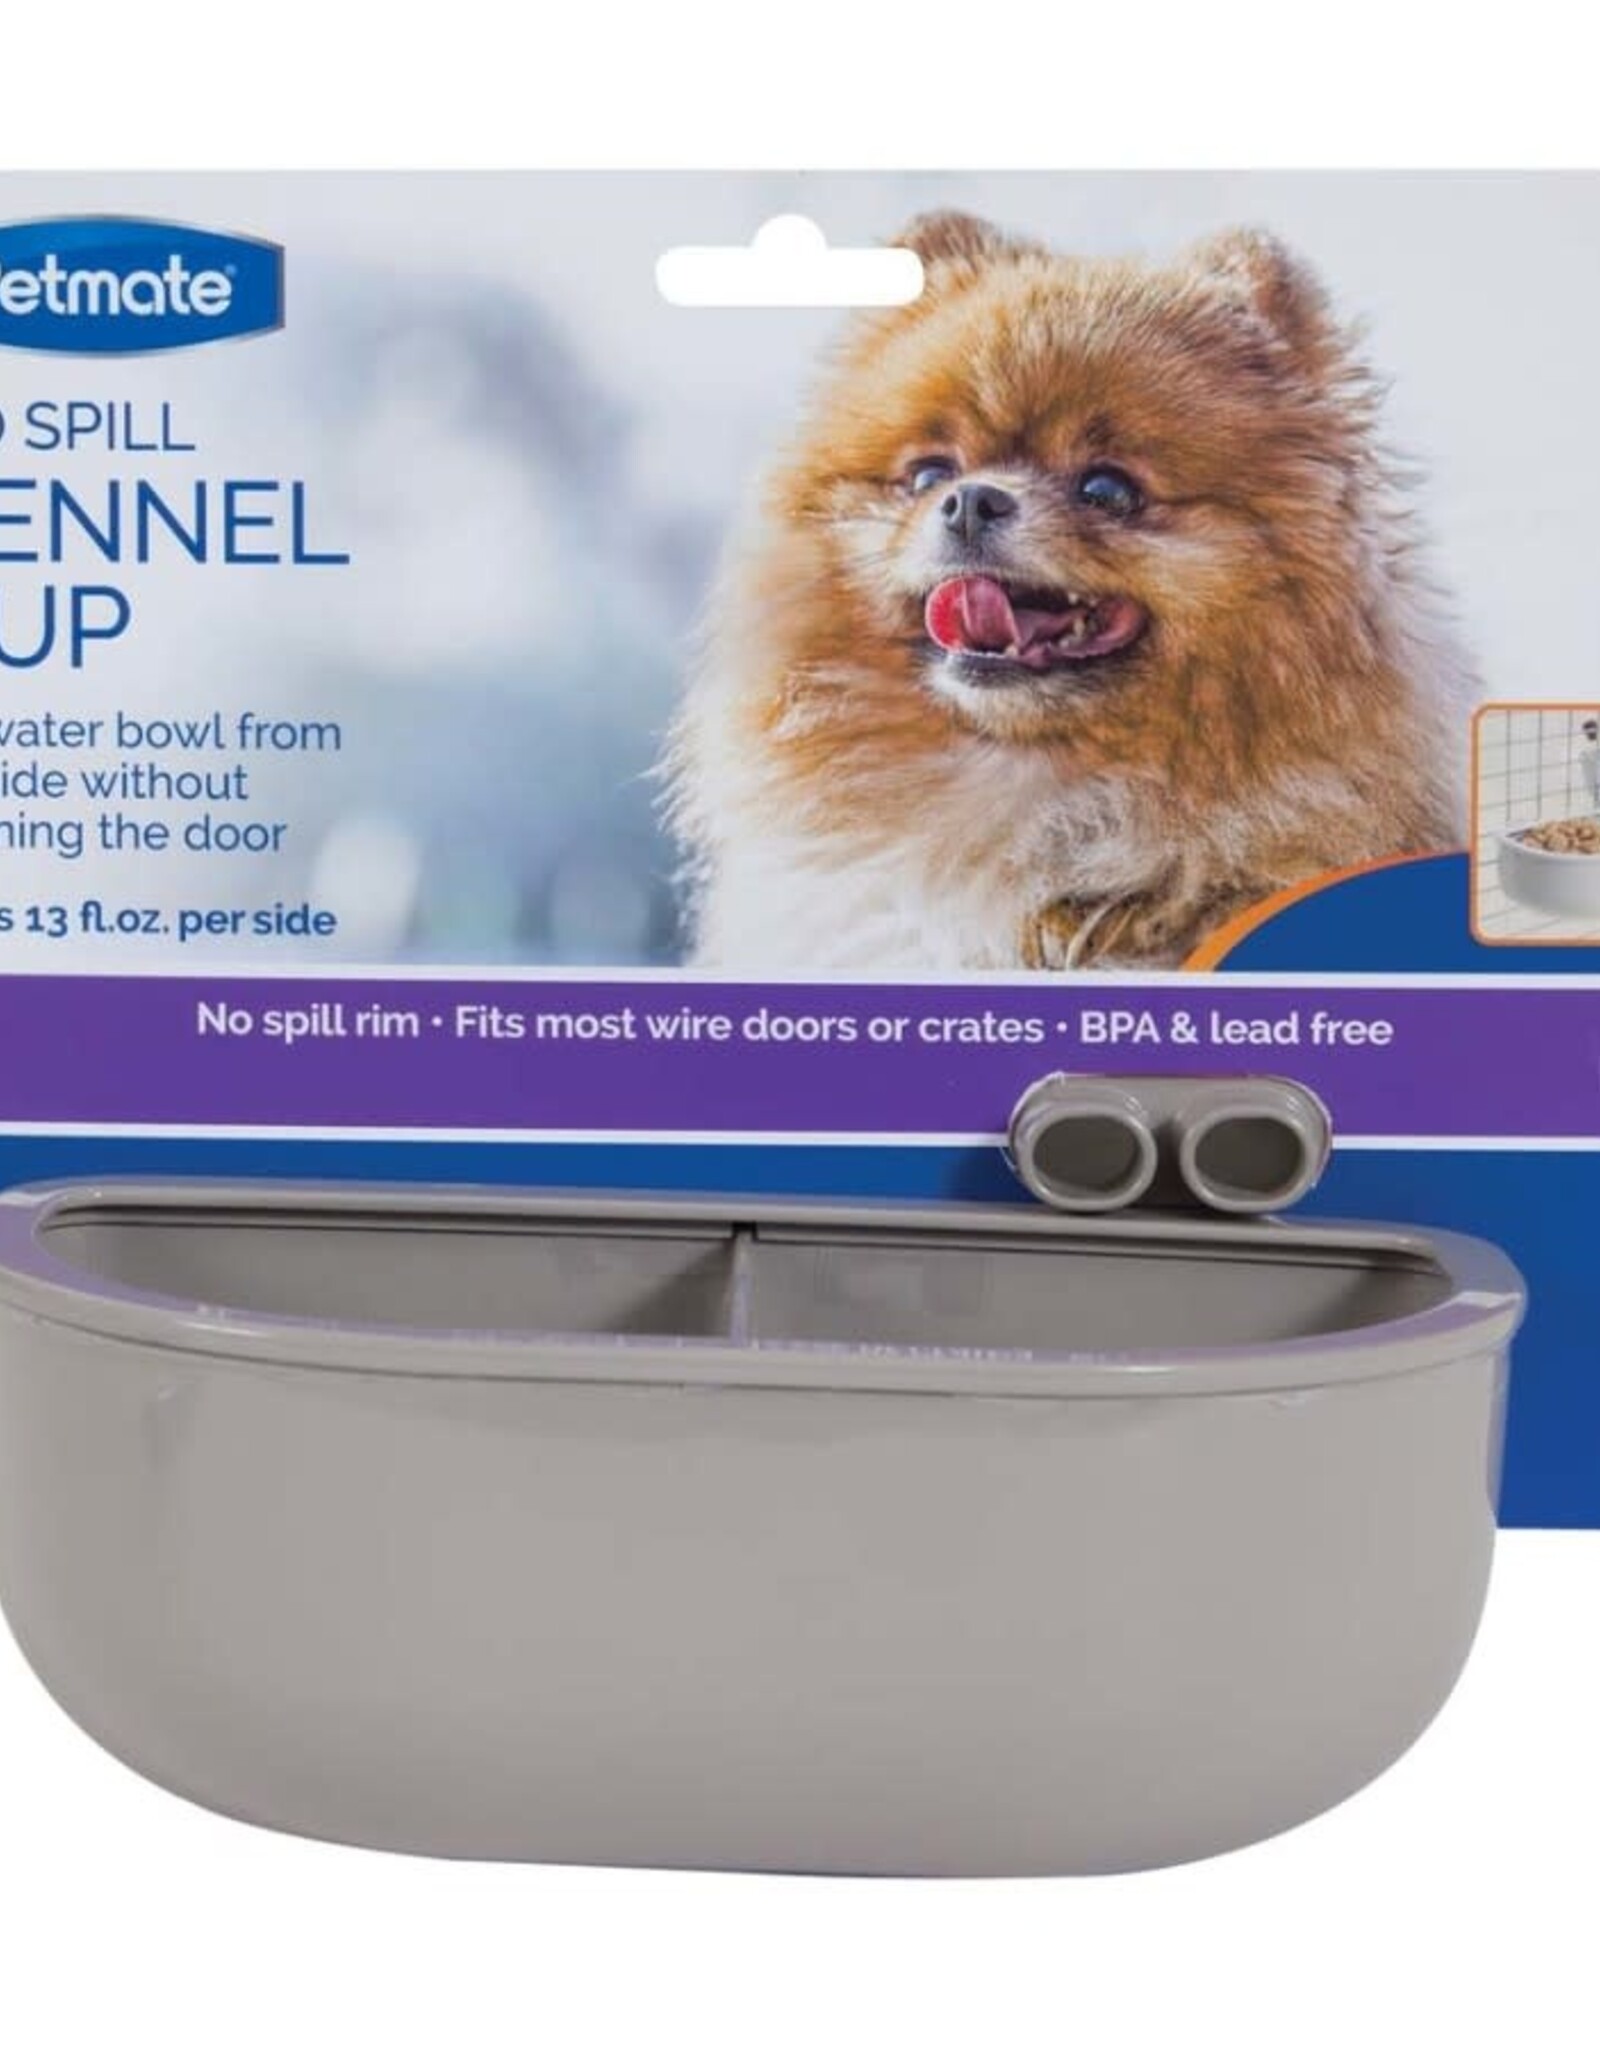 DOSKOCIL MFG CO INC Petmate No Spill Kennel Cup 13oz